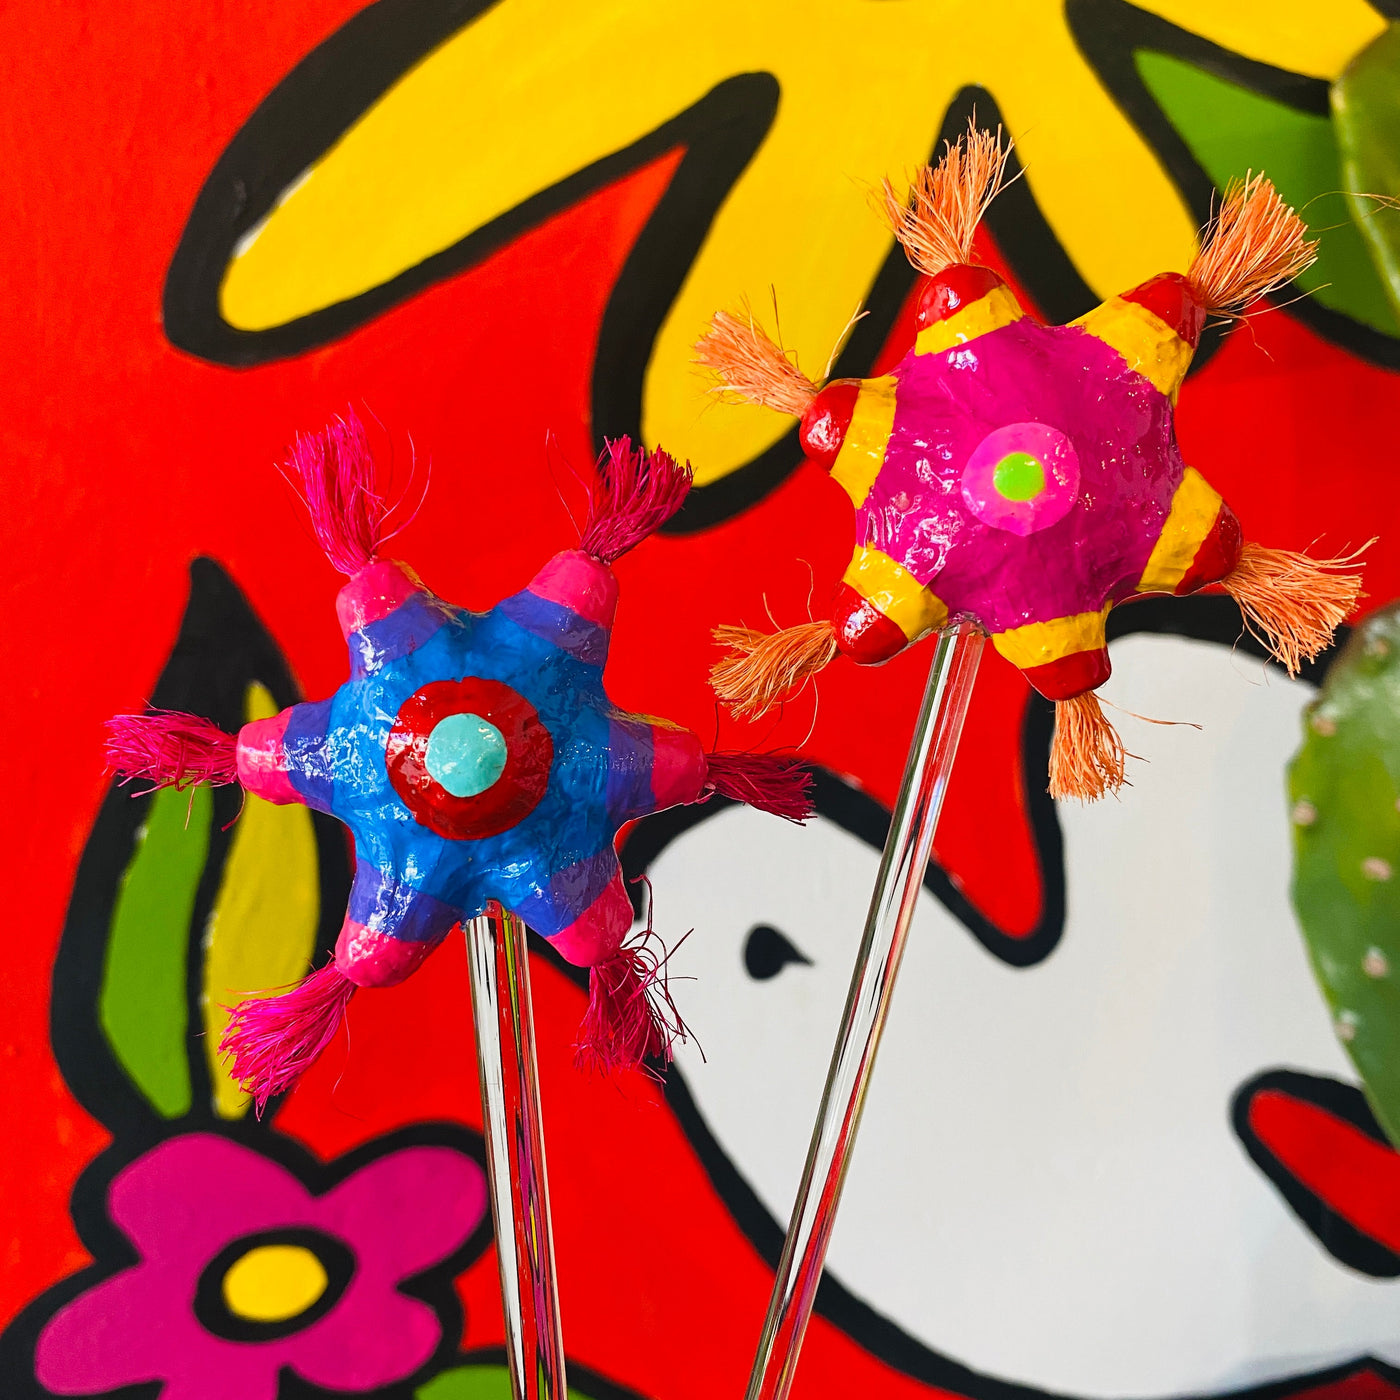 Brightly colorful star piñata glass stir sticks (style 1). Tassels at the end of each point of the star piñata. Glass stir sticks pictured in front of Artelexia Frida mural.